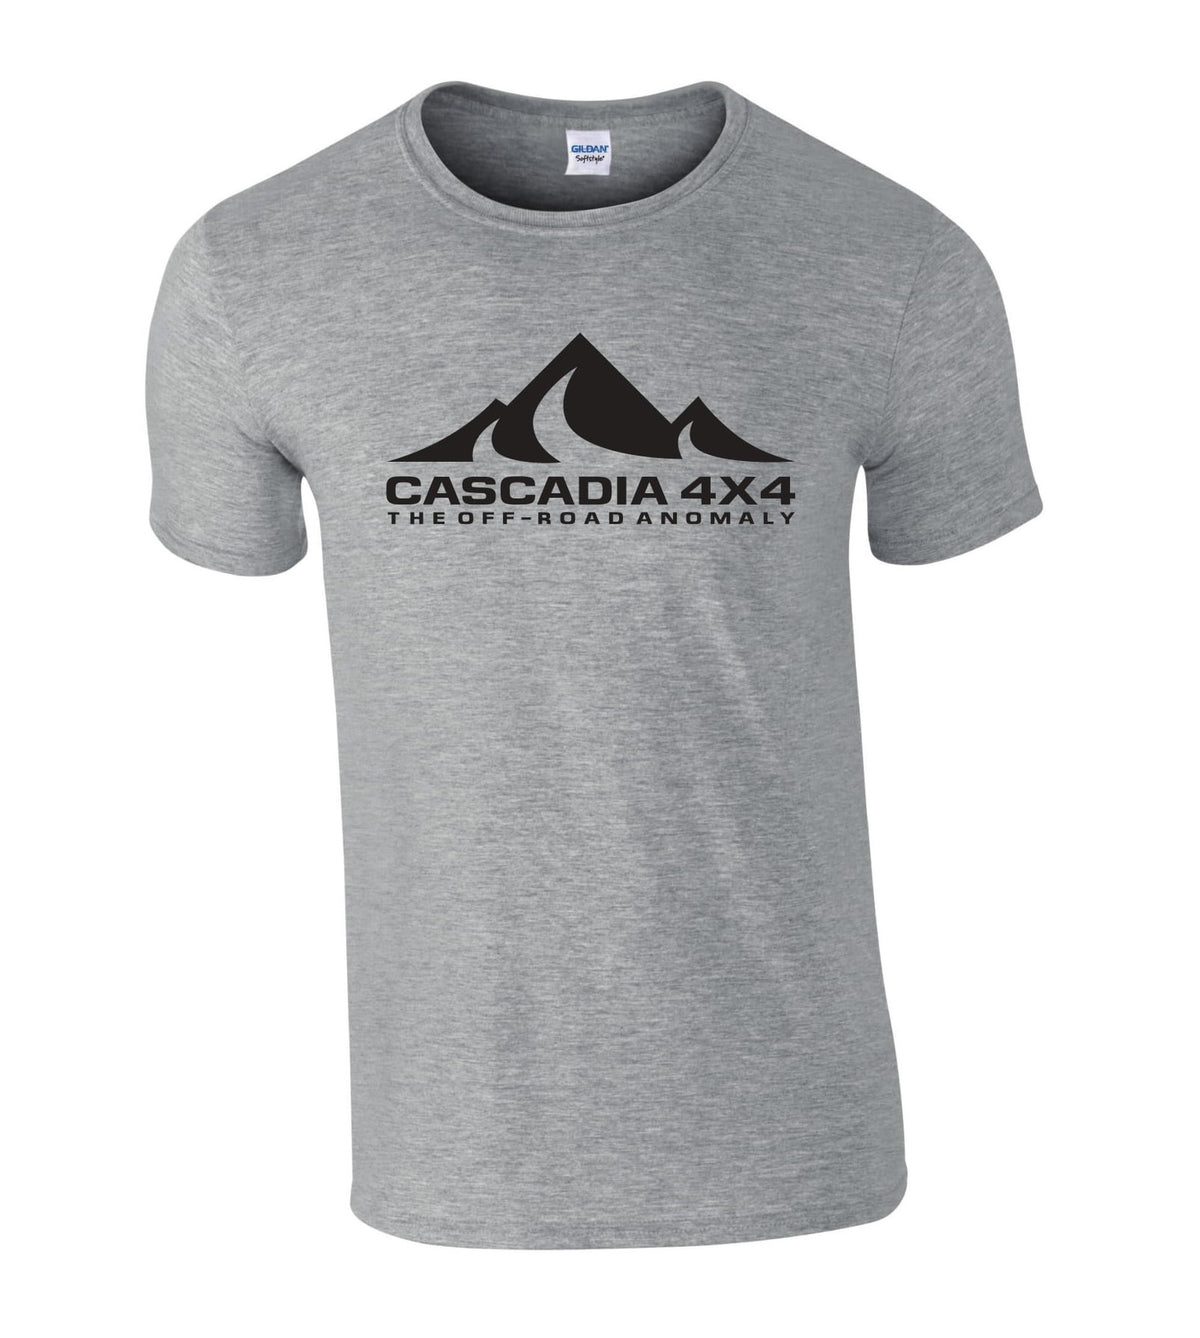 Products - Cascadia 4x4